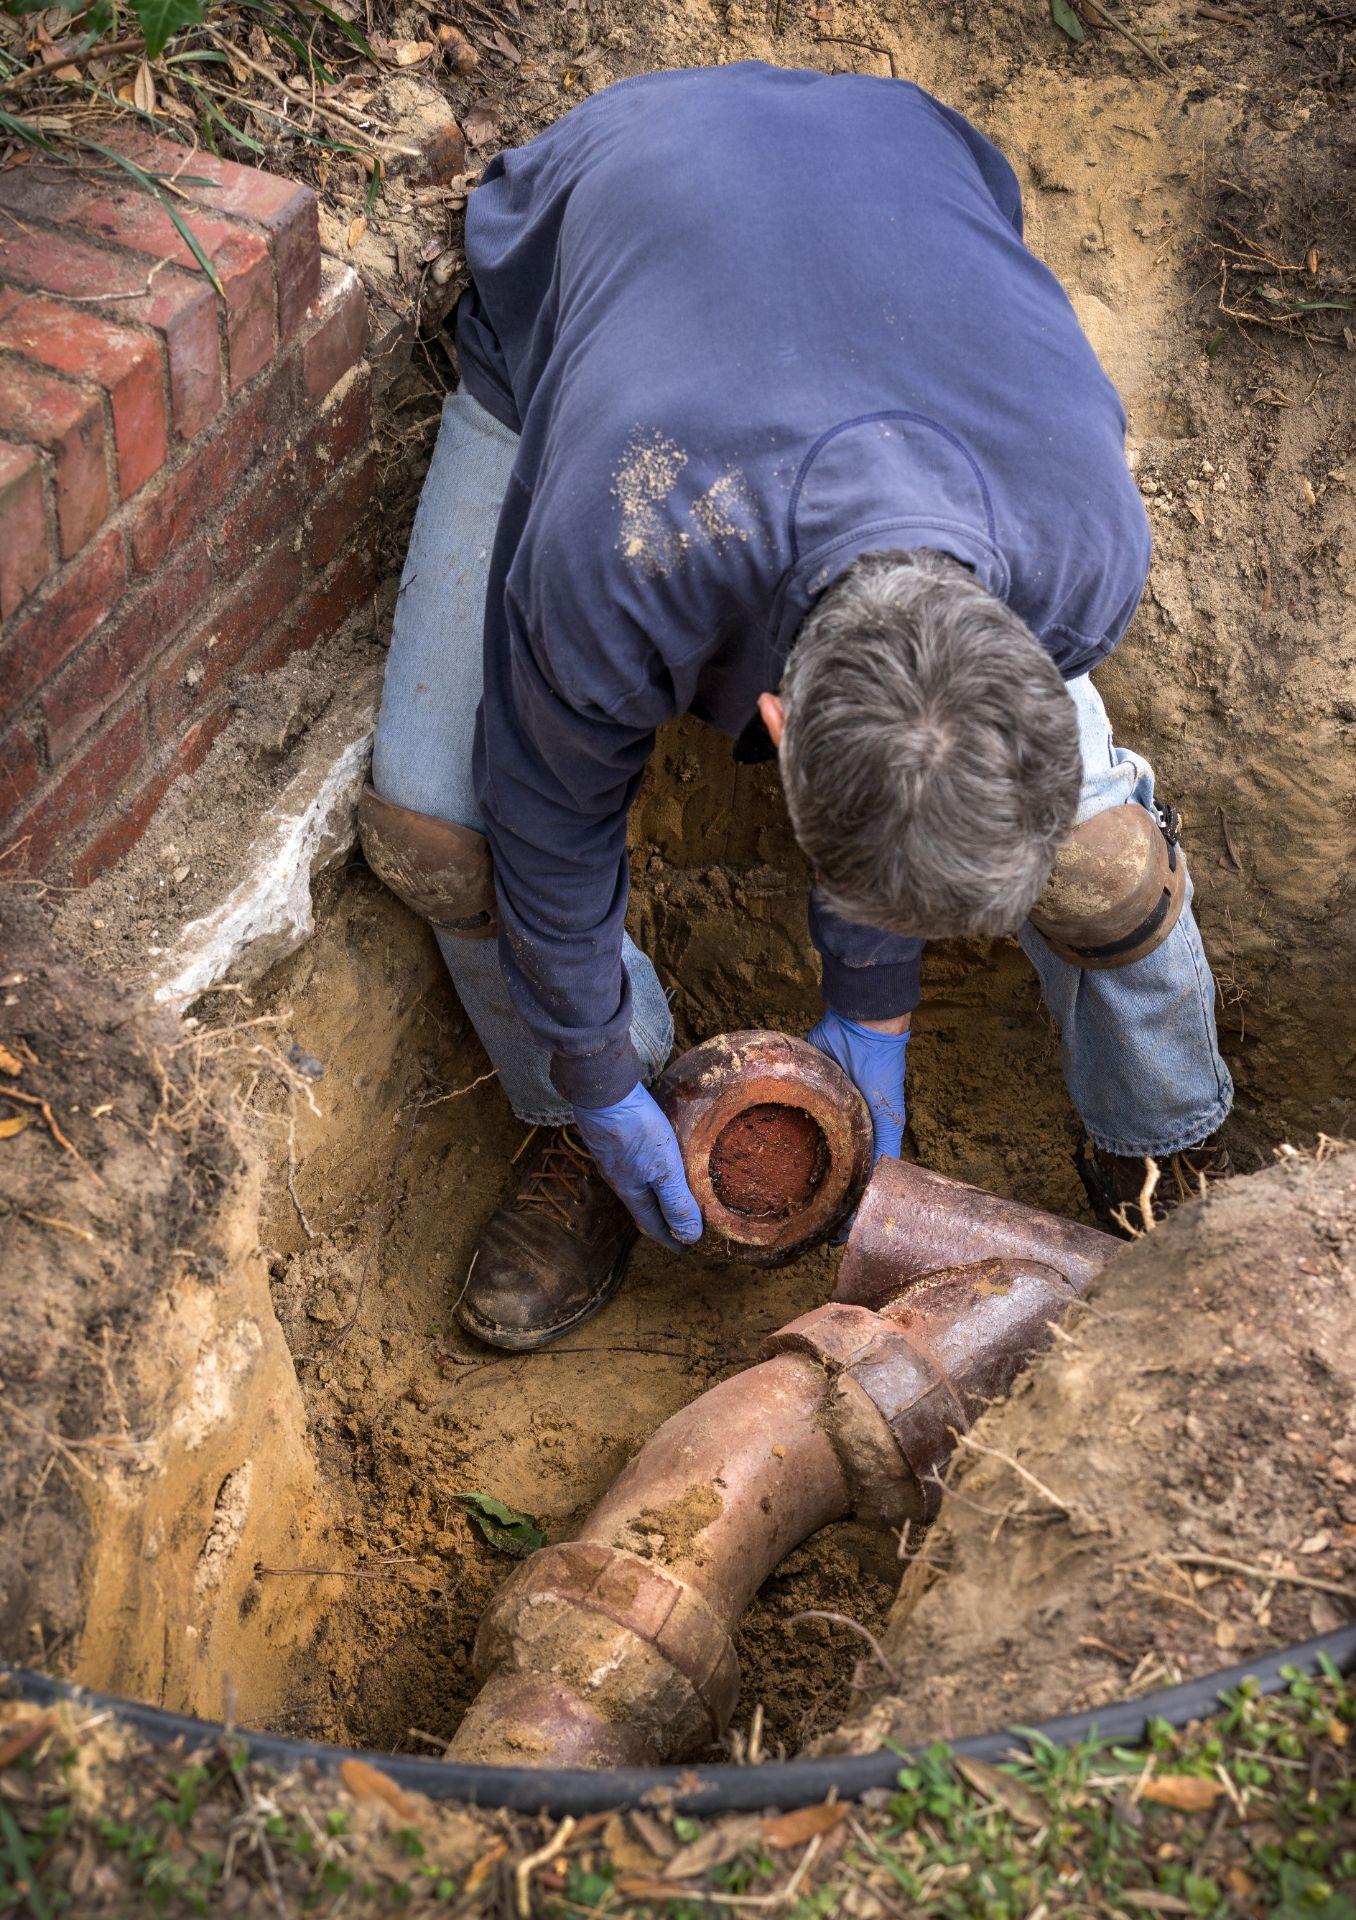 Plumber working on old clay ceramic sewer line pipes